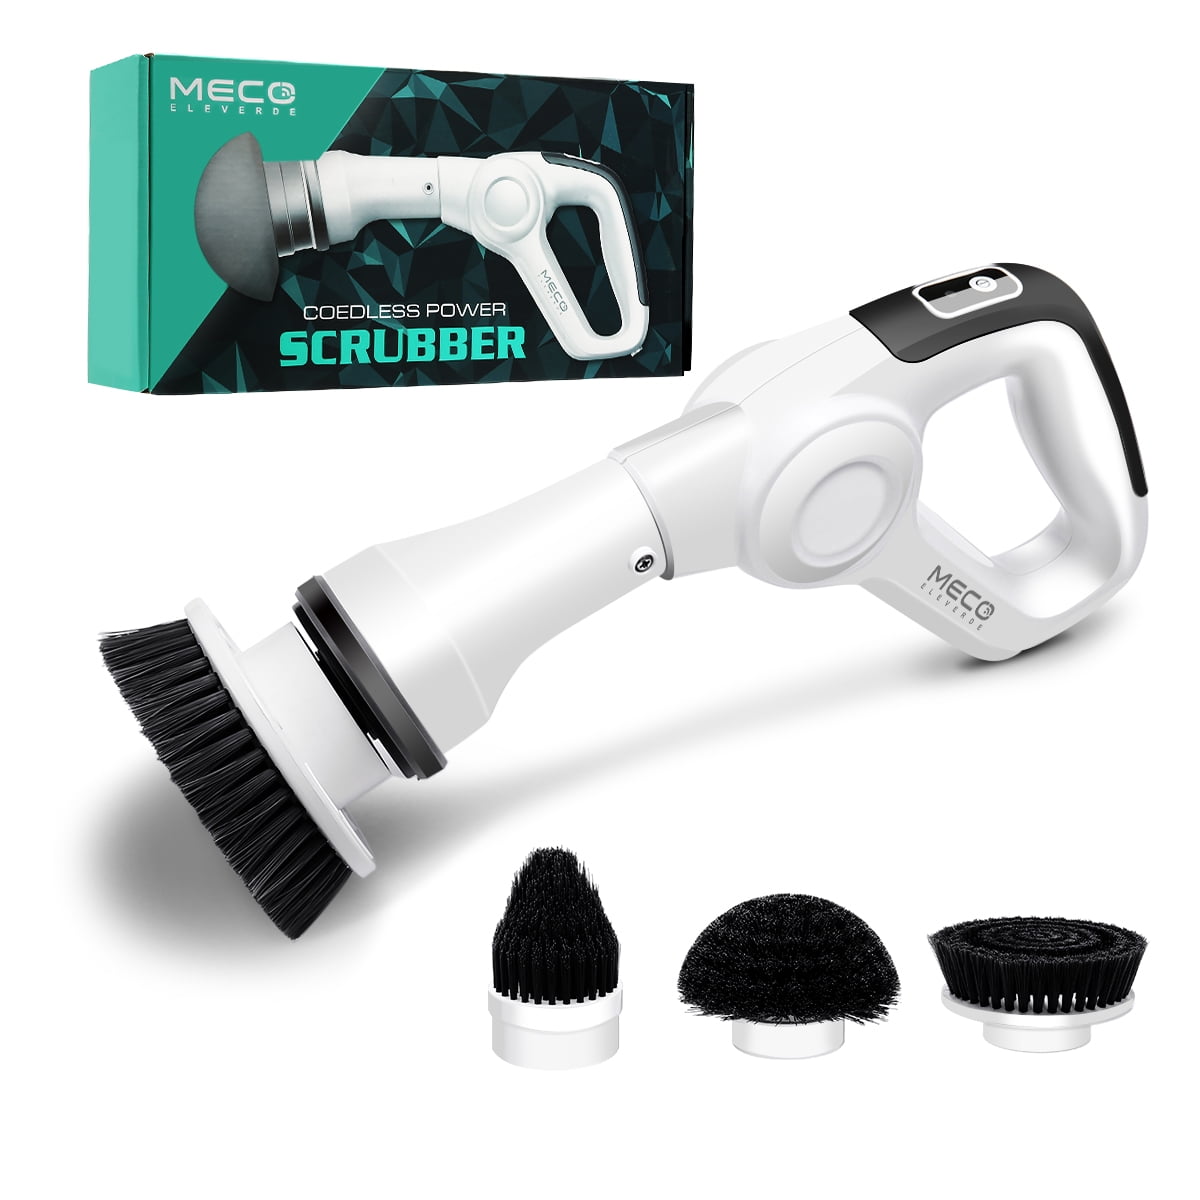 LABIGO Electric Spin Scrubber LA2 Pro, Shower Cleaning Brush with